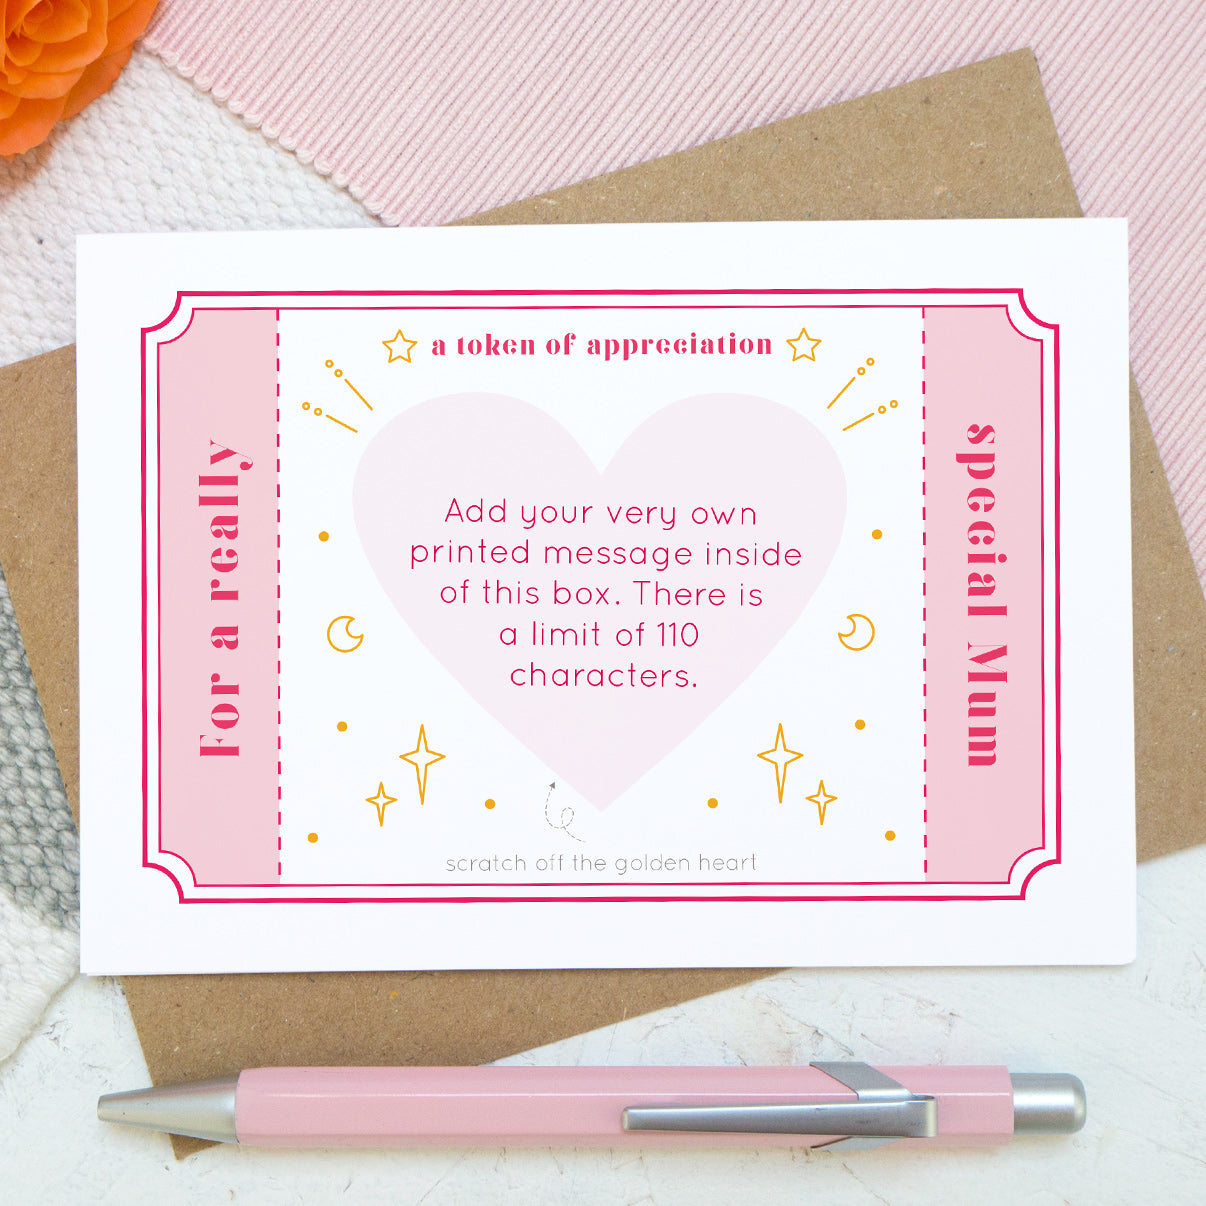 A token of appreciation scratch card by Joanne Hawker featuring a pink token and the words 'for a really special mum'. In the centre is a pink heart showing what a printed message could look like.